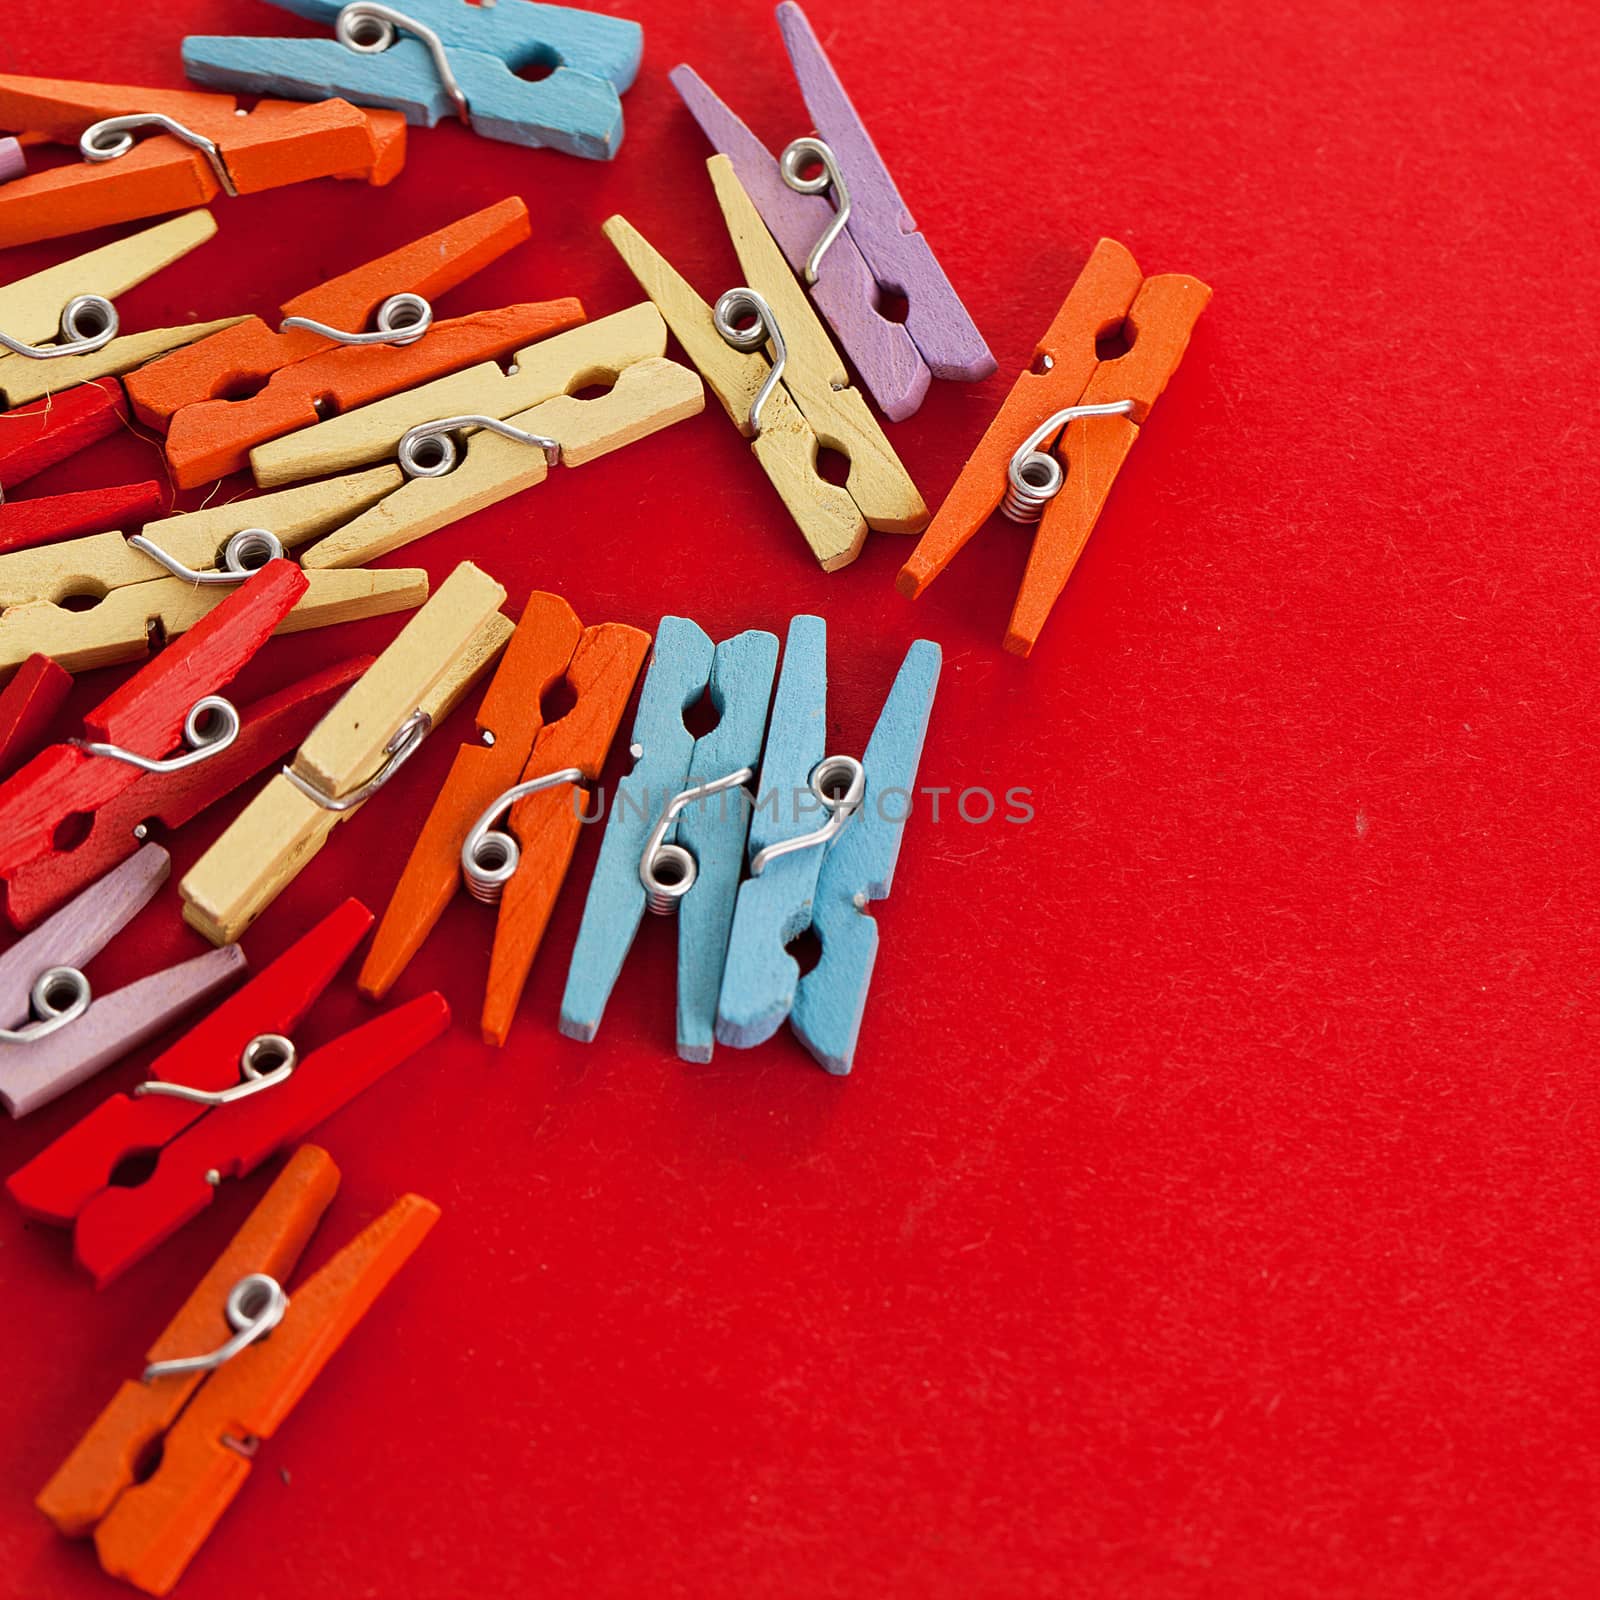 Closeup image of little colorful office clothespins on a red background